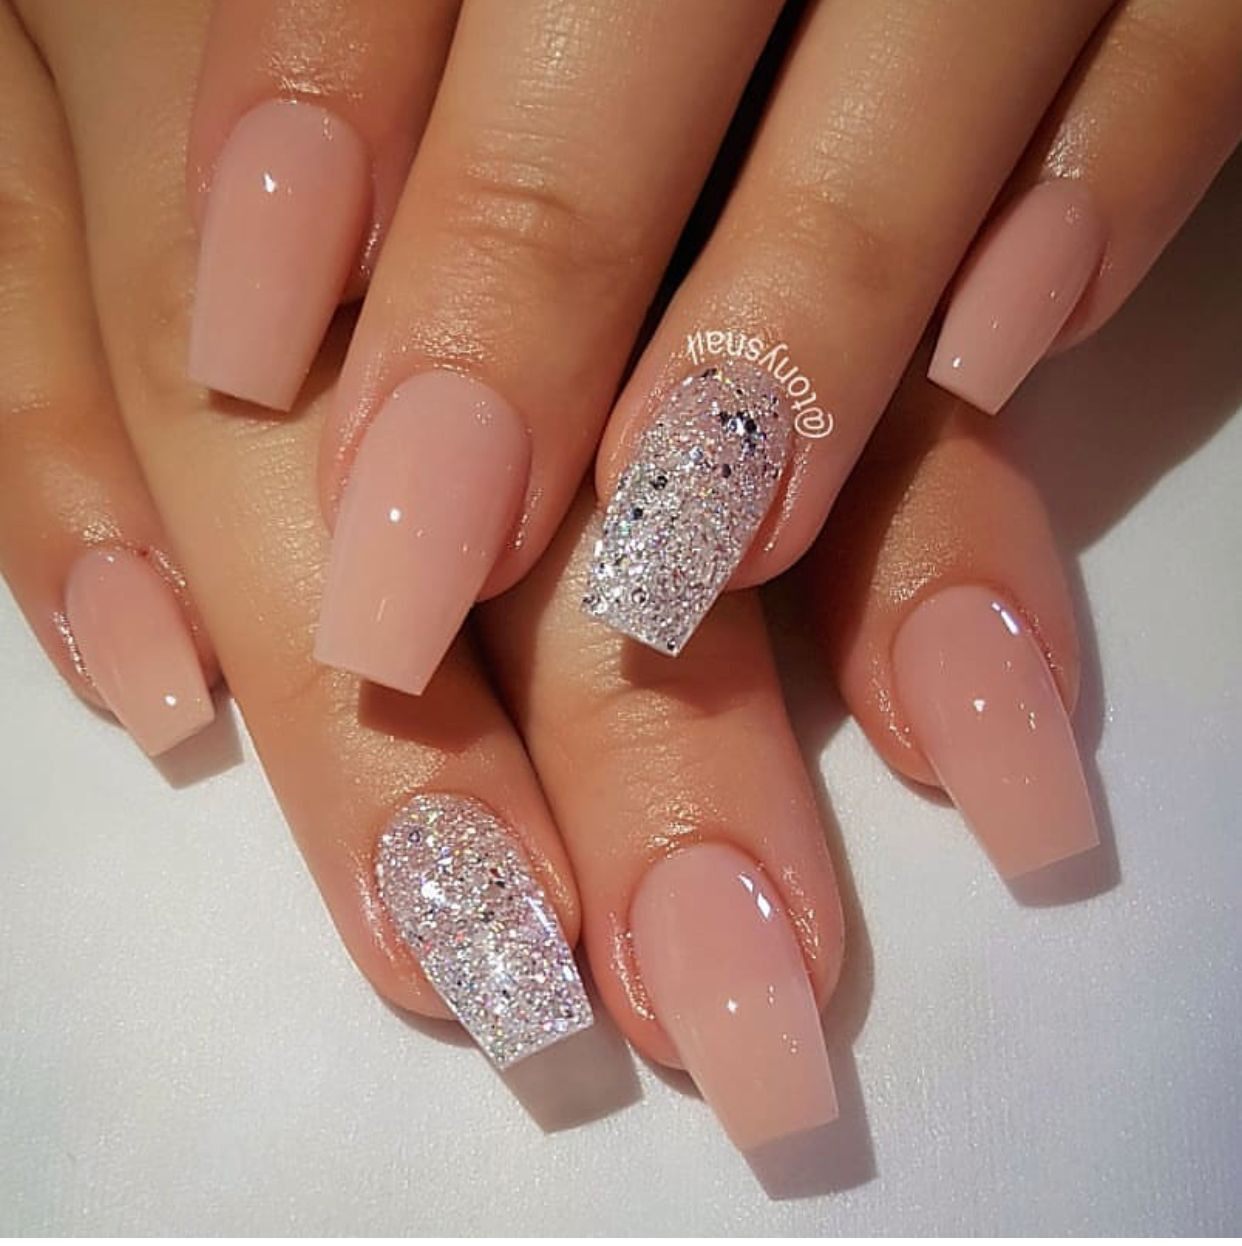 Pink And White Glitter Nails
 Nail art pink and silver glitter nails in 2019